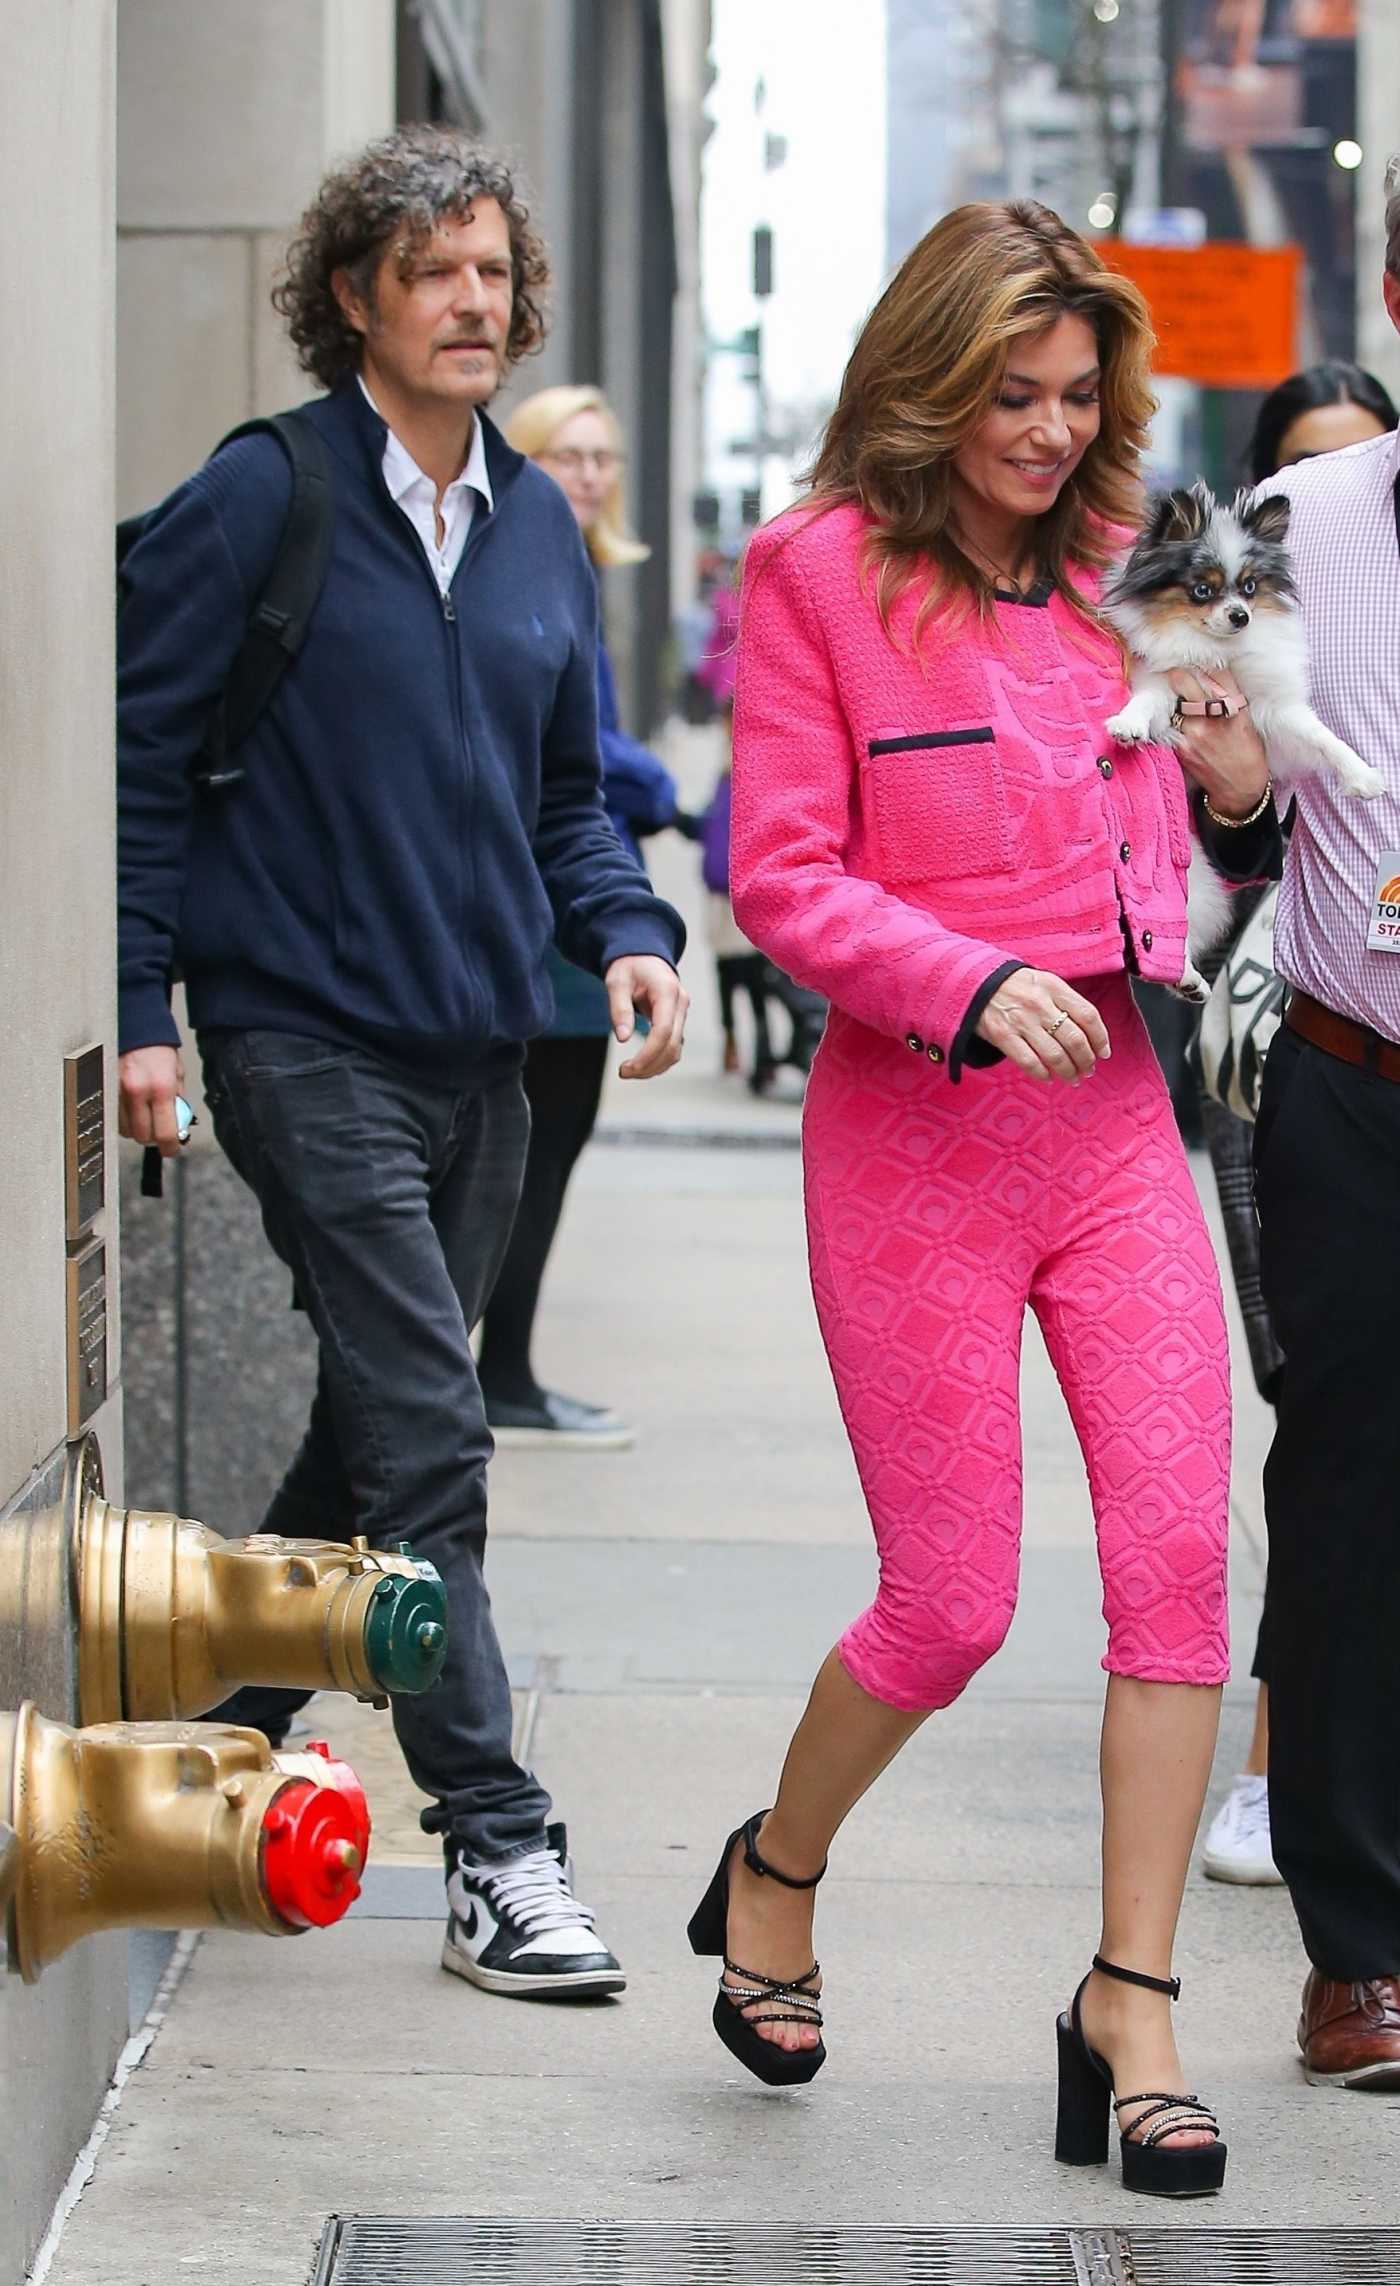 Shania Twain in a Pink Ensemble Carries Her Puppy Out in New York 01/05/2023